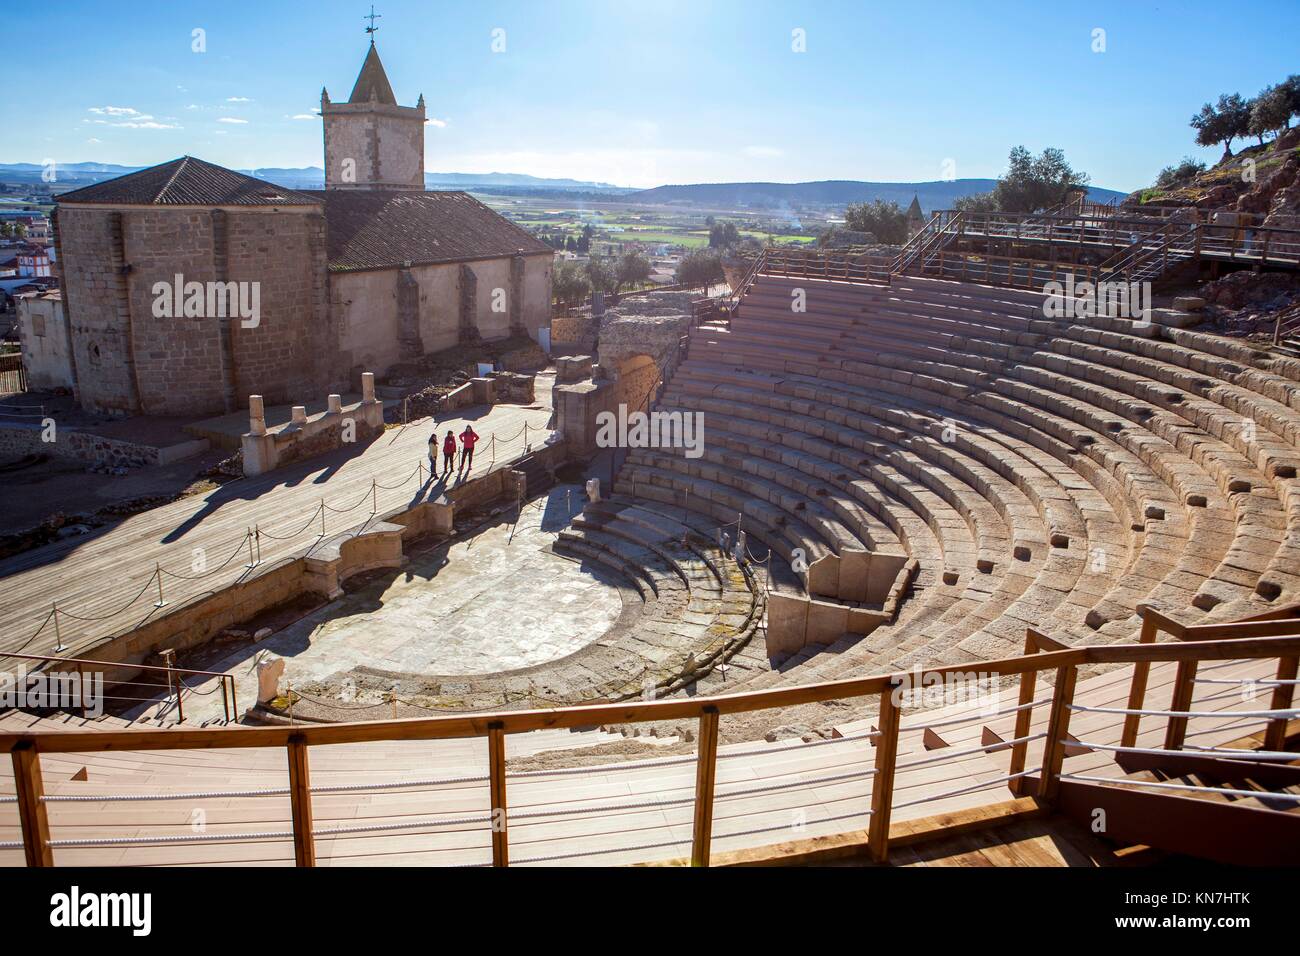 Two people with tourist guide visiting the Roman theatre of Medellin, Spain. High view from grandstand to stage. Stock Photo